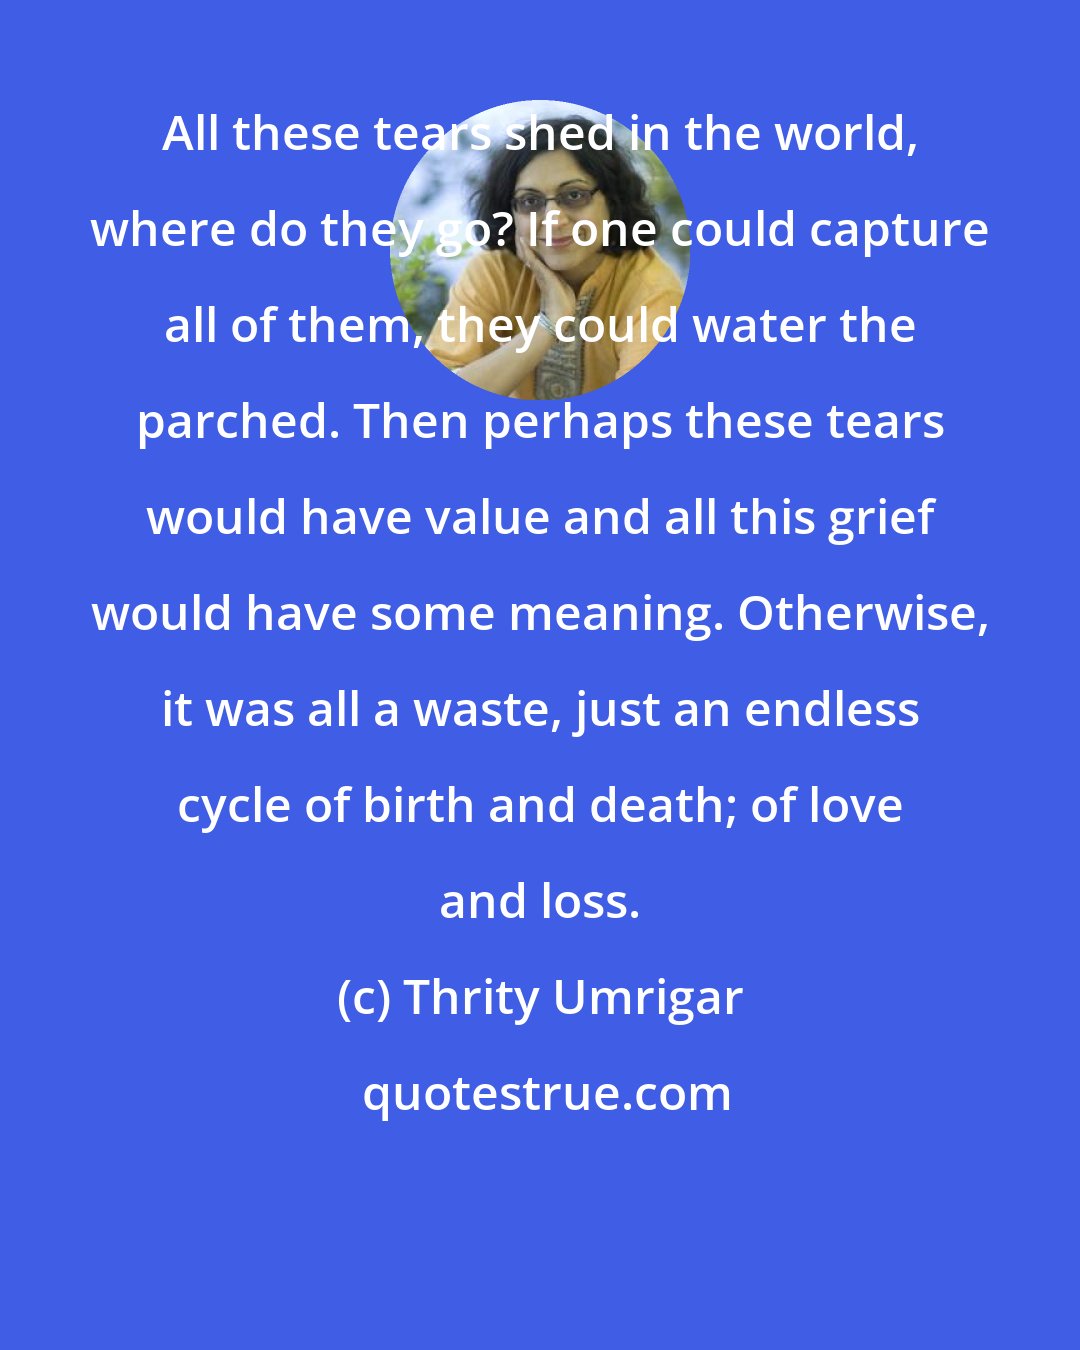 Thrity Umrigar: All these tears shed in the world, where do they go? If one could capture all of them, they could water the parched. Then perhaps these tears would have value and all this grief would have some meaning. Otherwise, it was all a waste, just an endless cycle of birth and death; of love and loss.